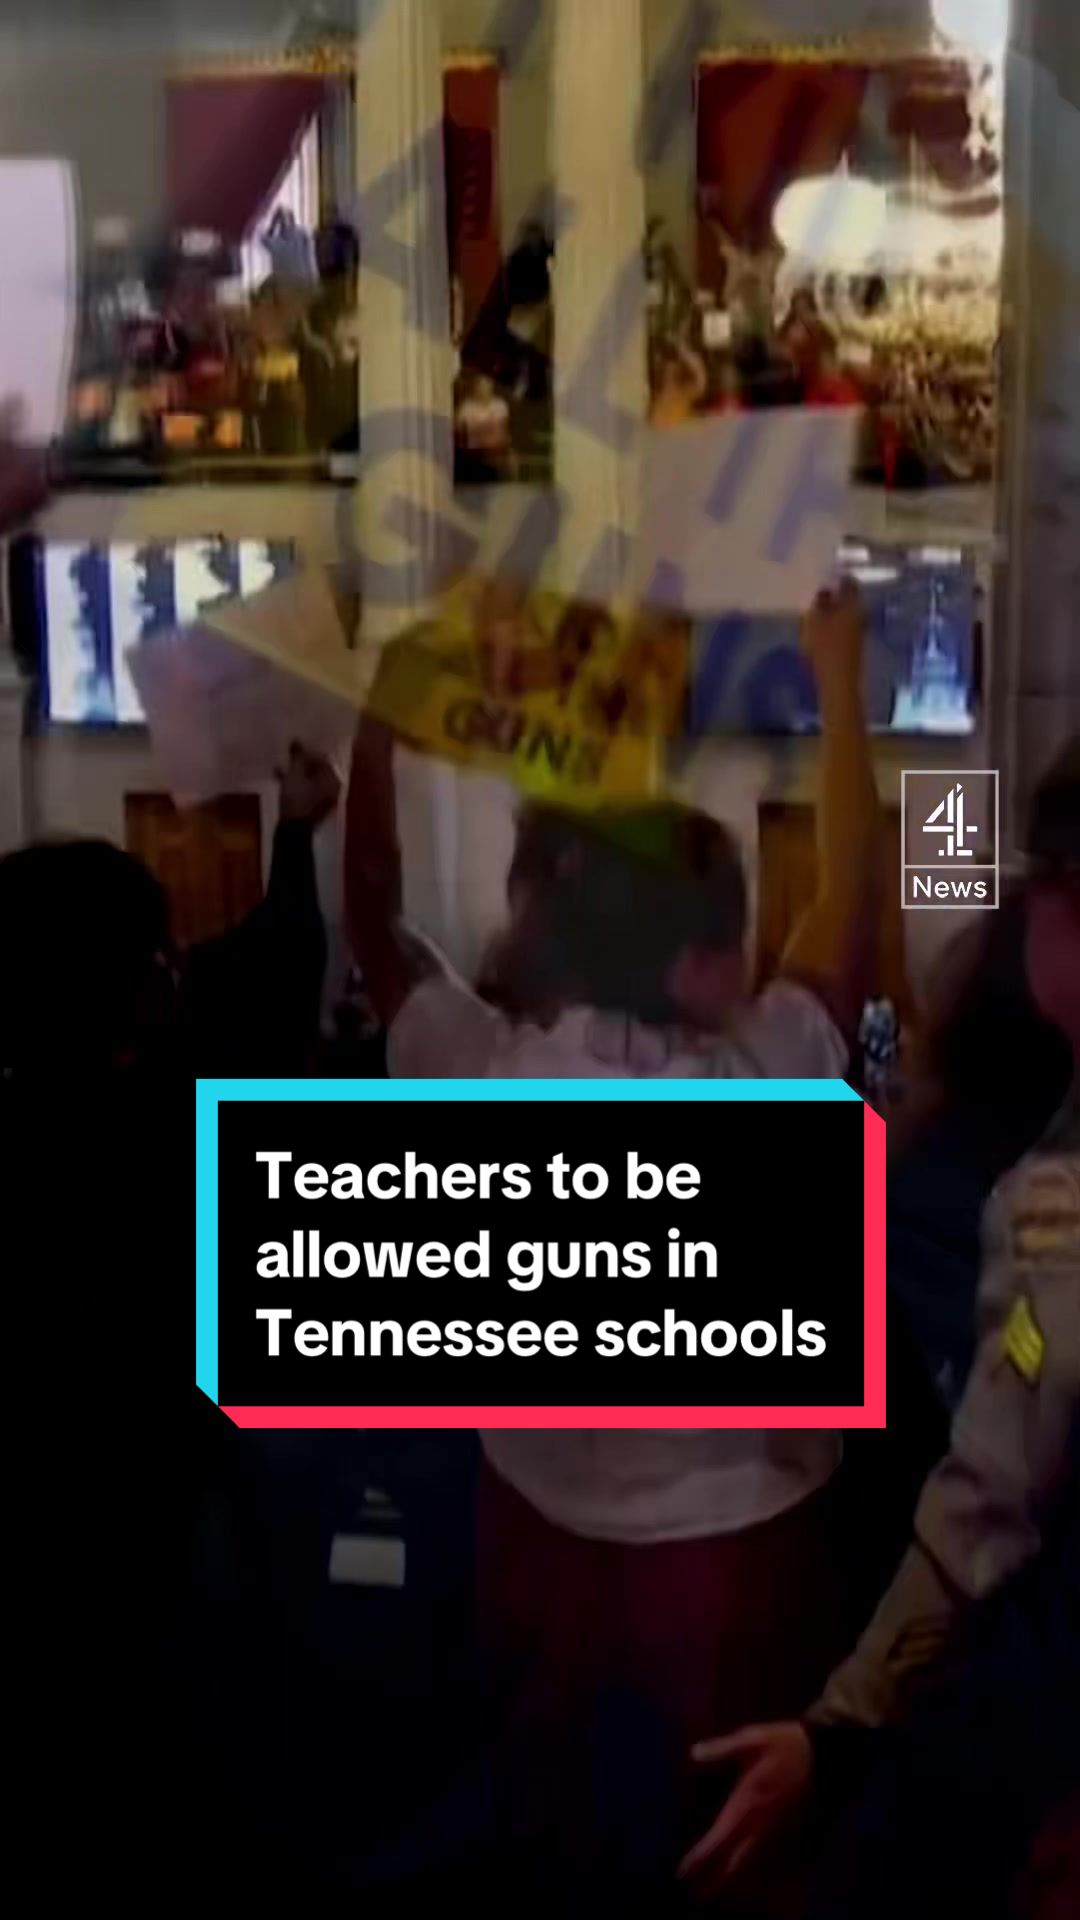 Tennessee’s Republican lawmakers passed a bill on Tuesday allowing some teachers to carry concealed weapons in classrooms. We’ve spent time with Democrat representative and anti-gun campaigner Justin Jones, and spoke to Senator Paul Bailey who sponsored the legislation #US #USA #Tennessee #law